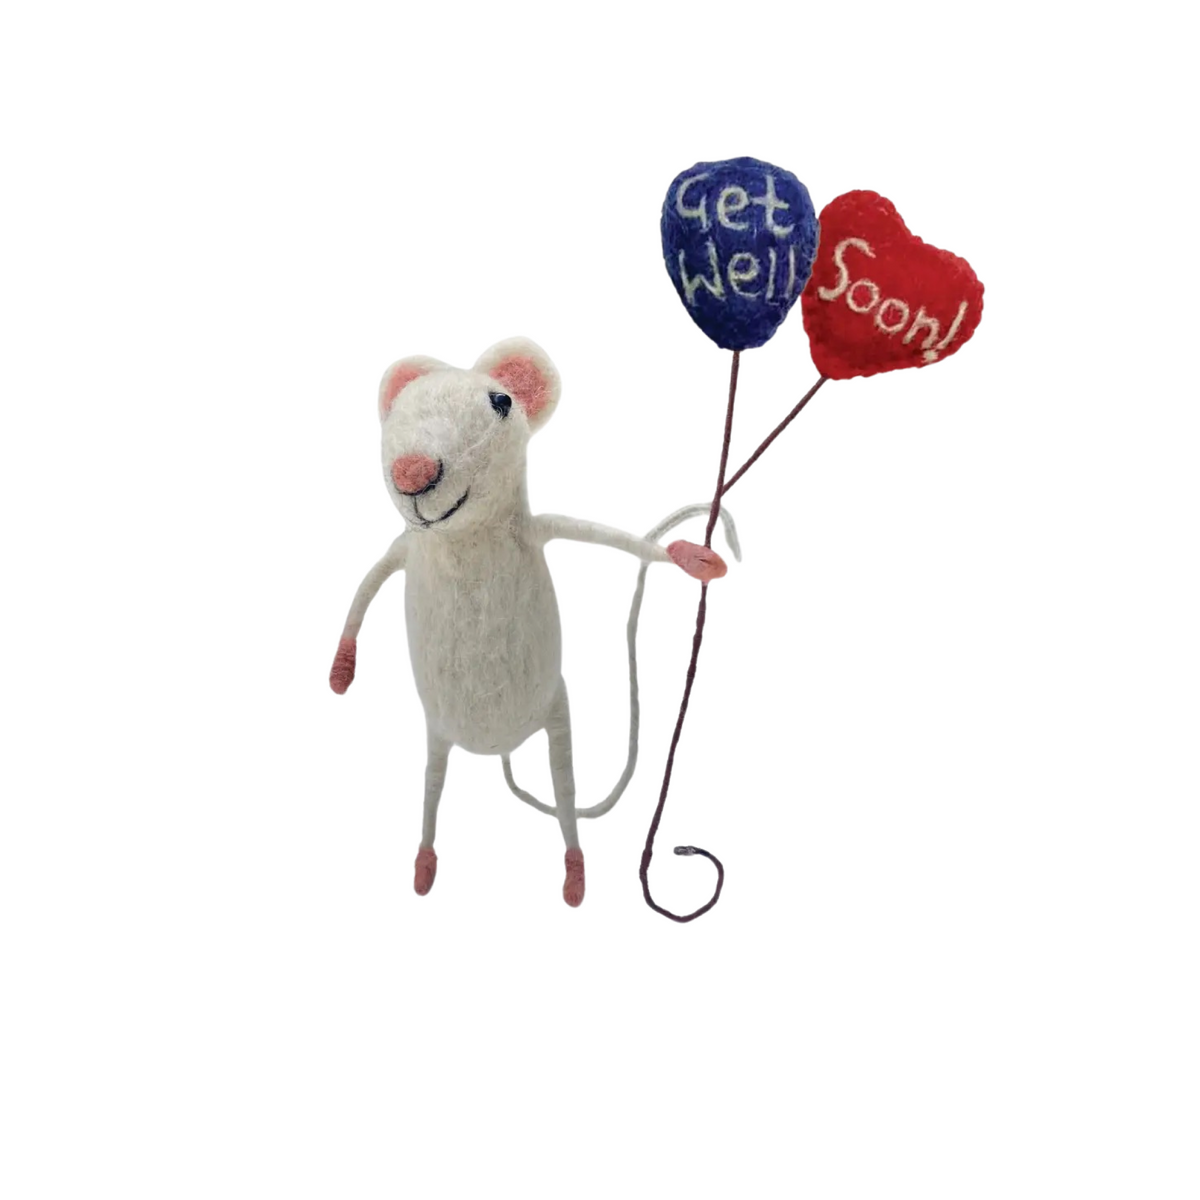 Felted Get Well Soon Mouse Miniature